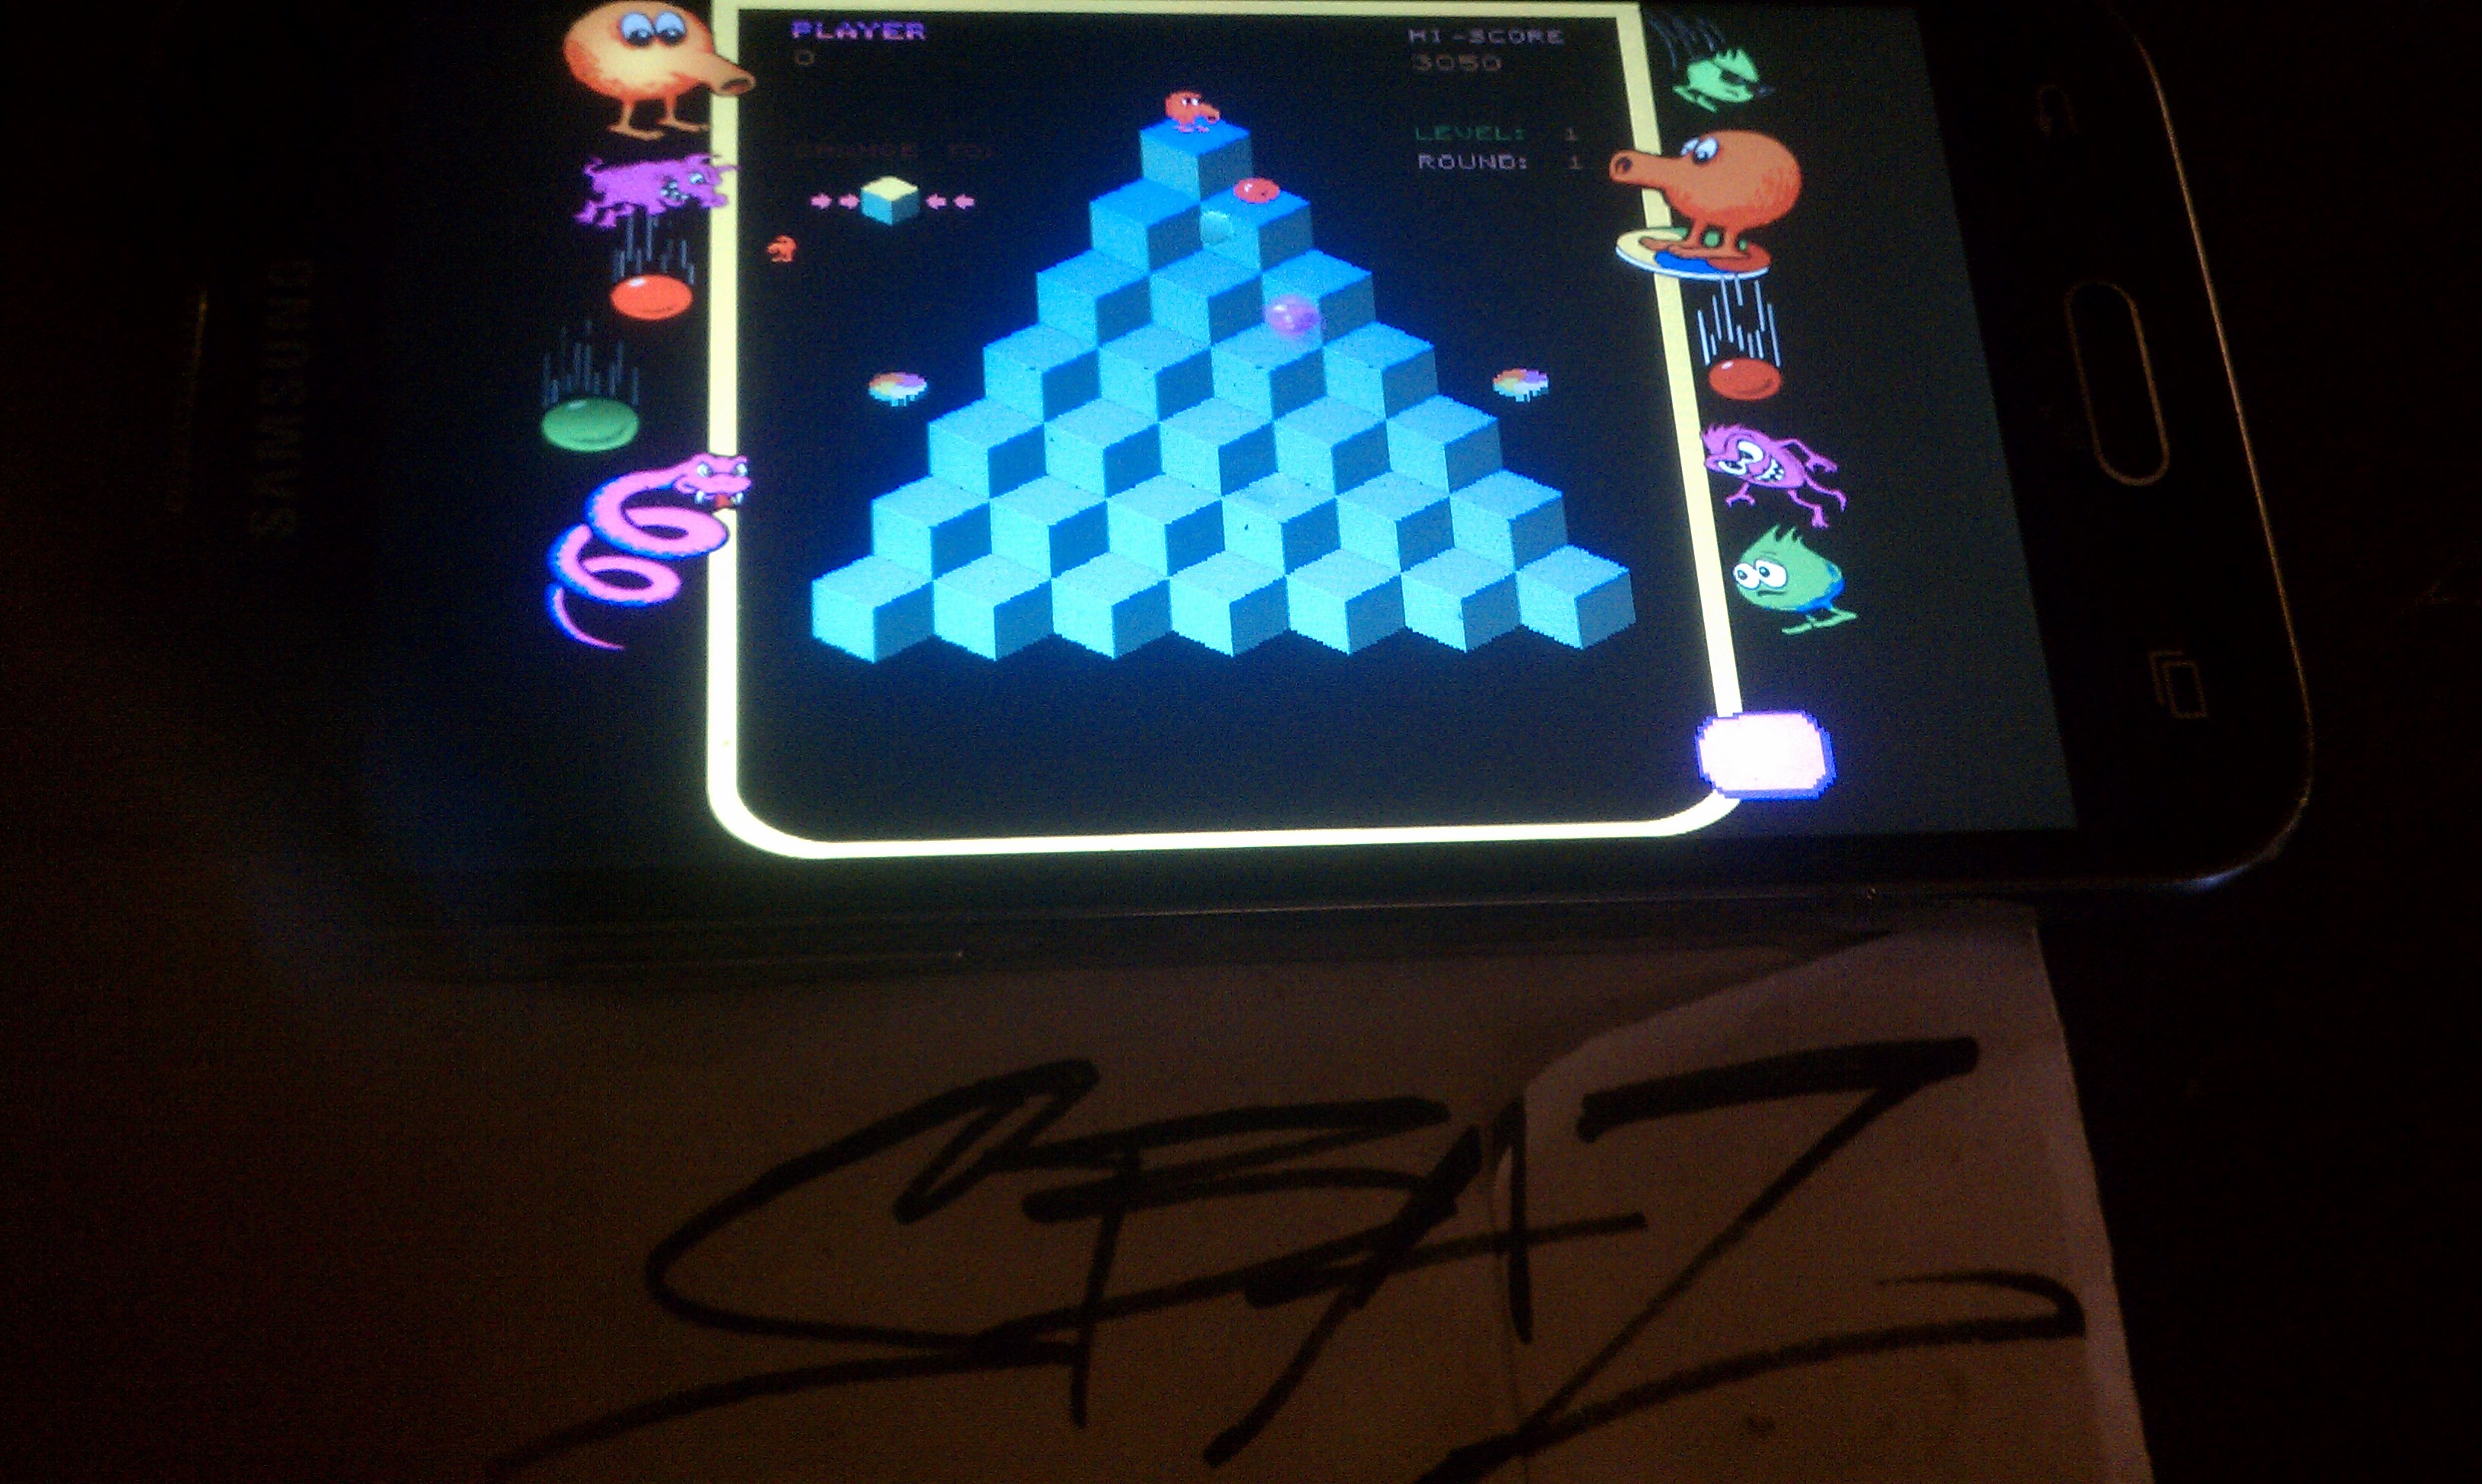 S.BAZ: Q*bert Rebooted [Classic] (Android) 3,050 points on 2018-02-14 21:37:16